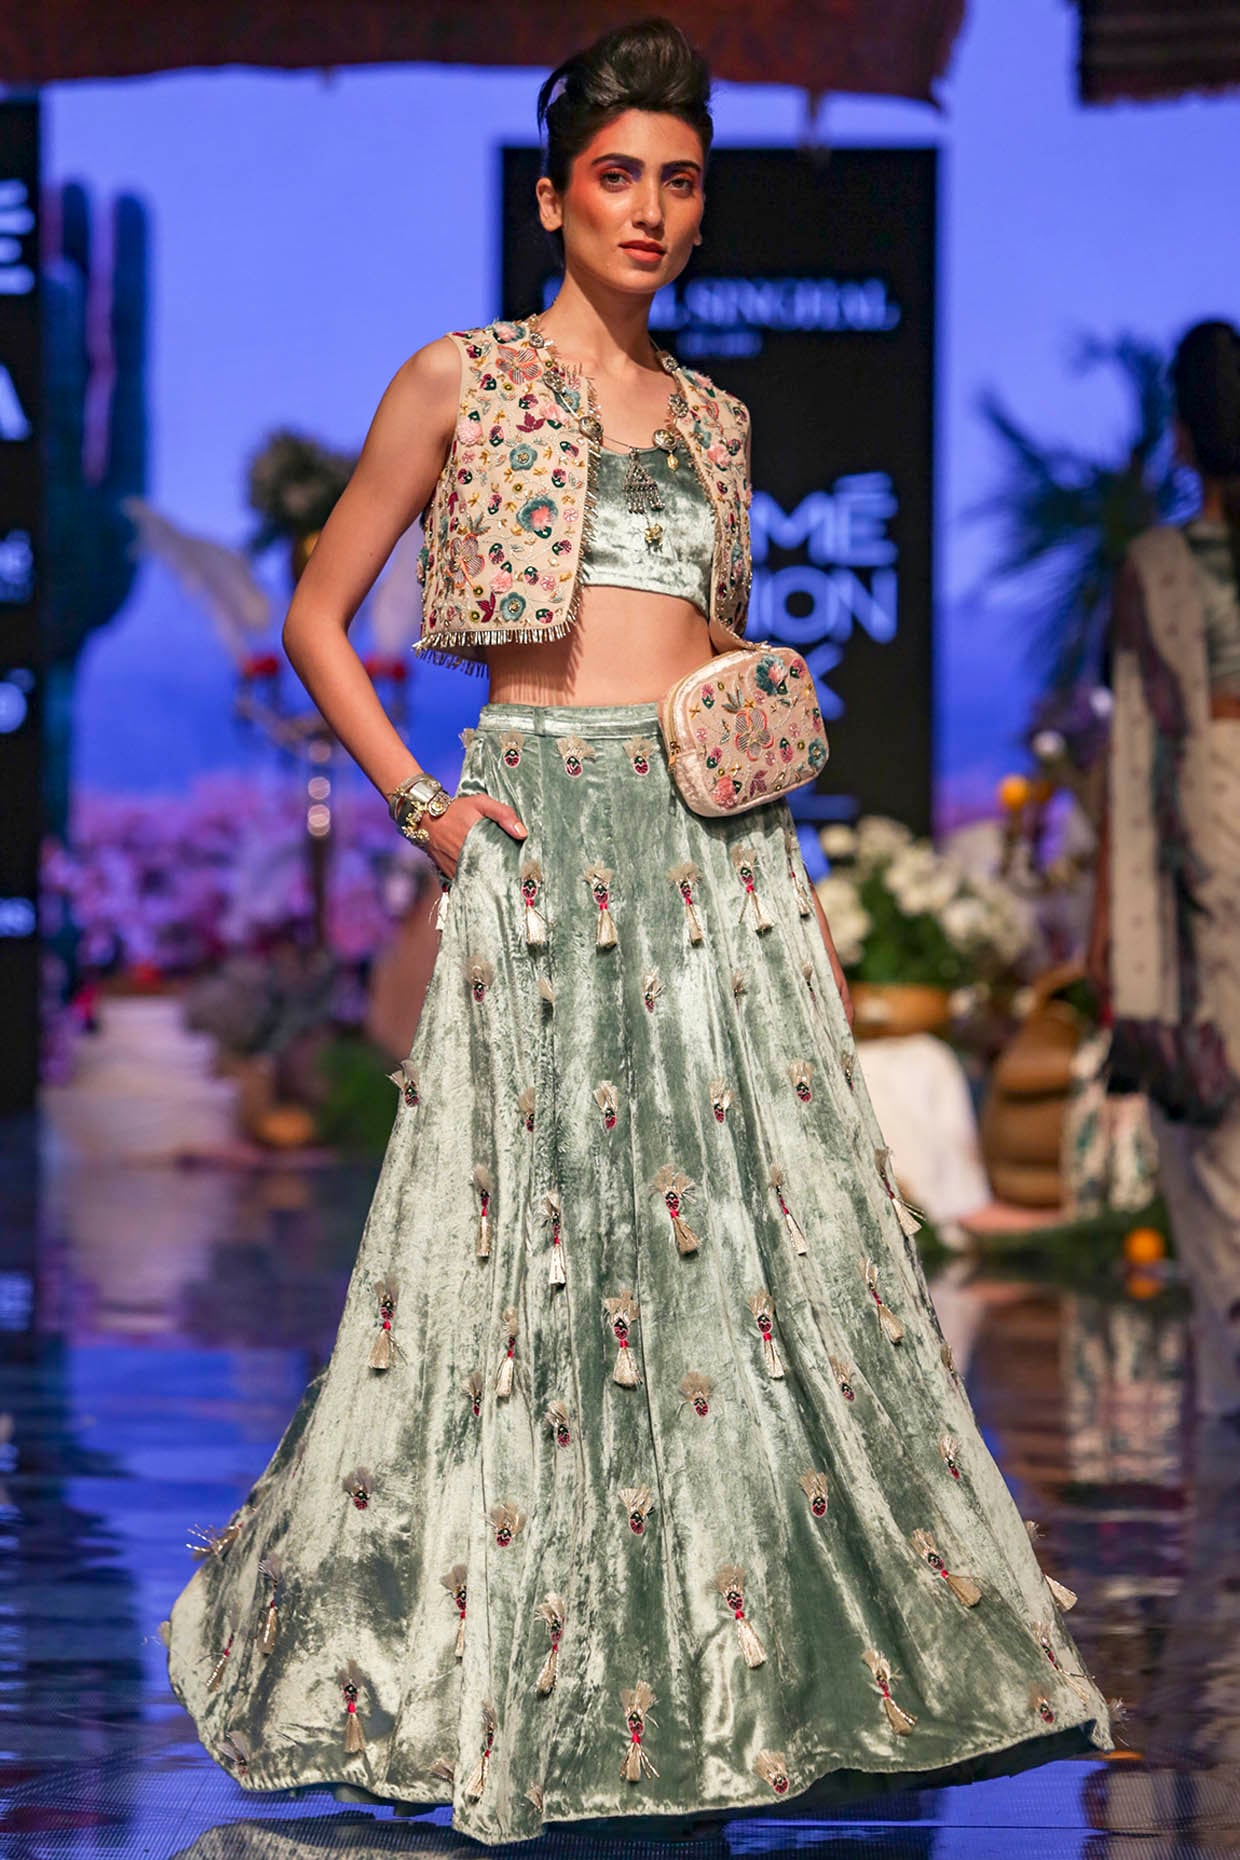 Classy Blue colored Embroidered Lehenga Set with jacket - Rent